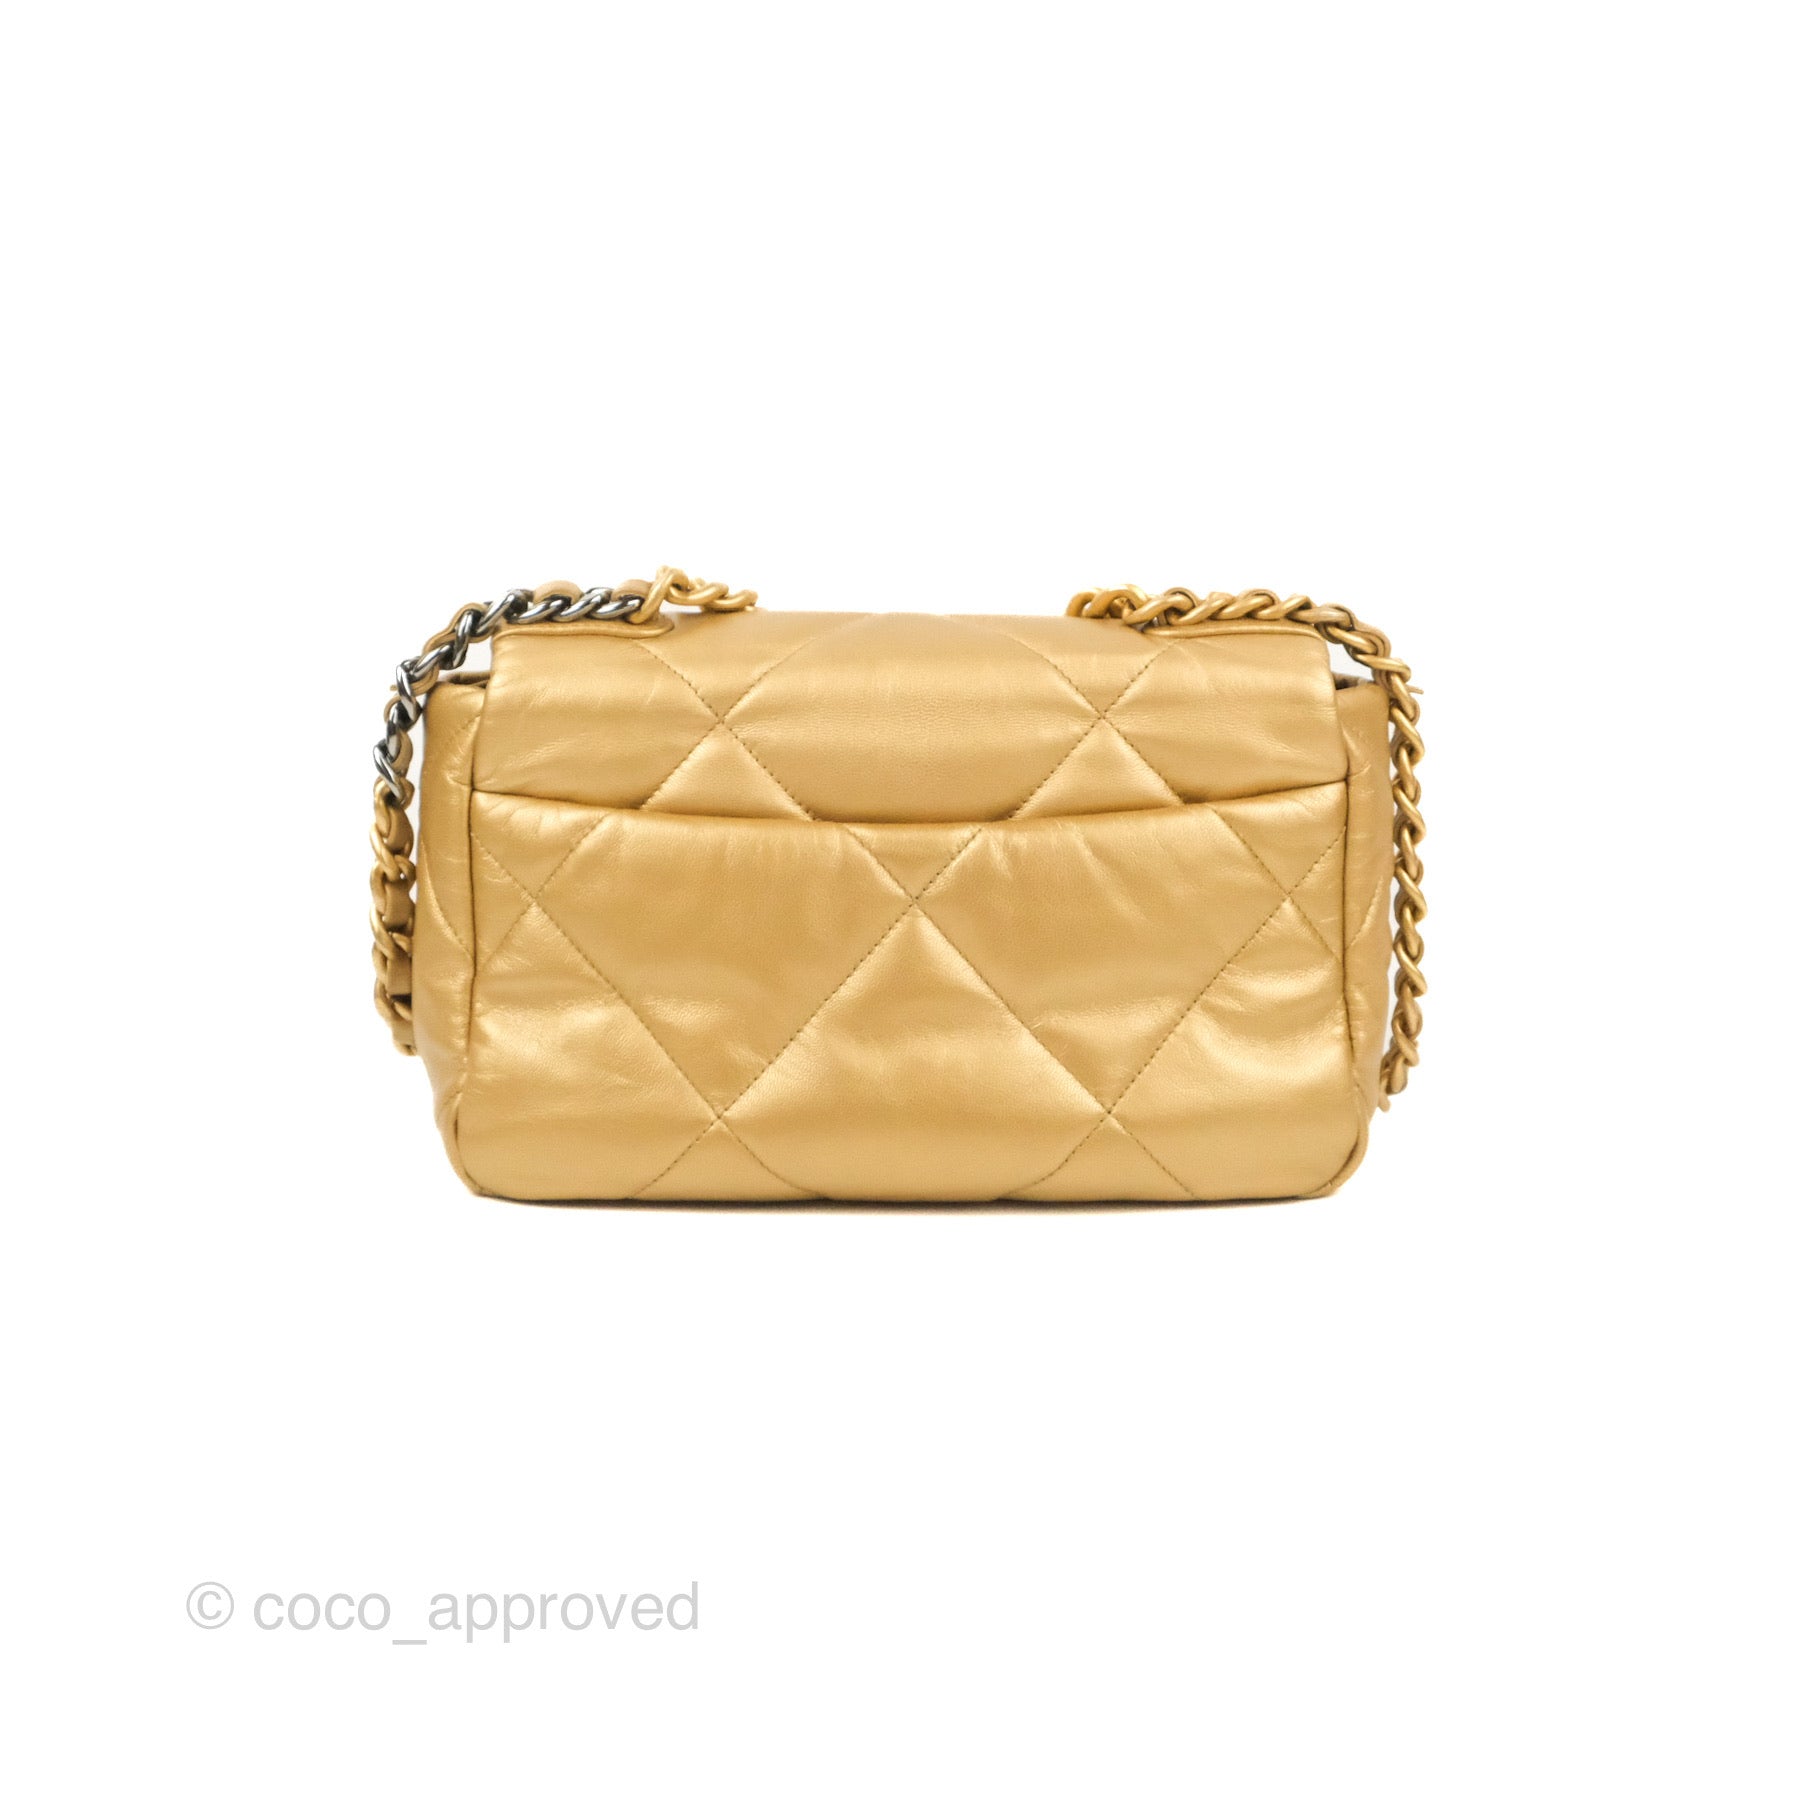 CHANEL Metallic Goatskin Quilted Chanel 19 Card Holder Gold 618014